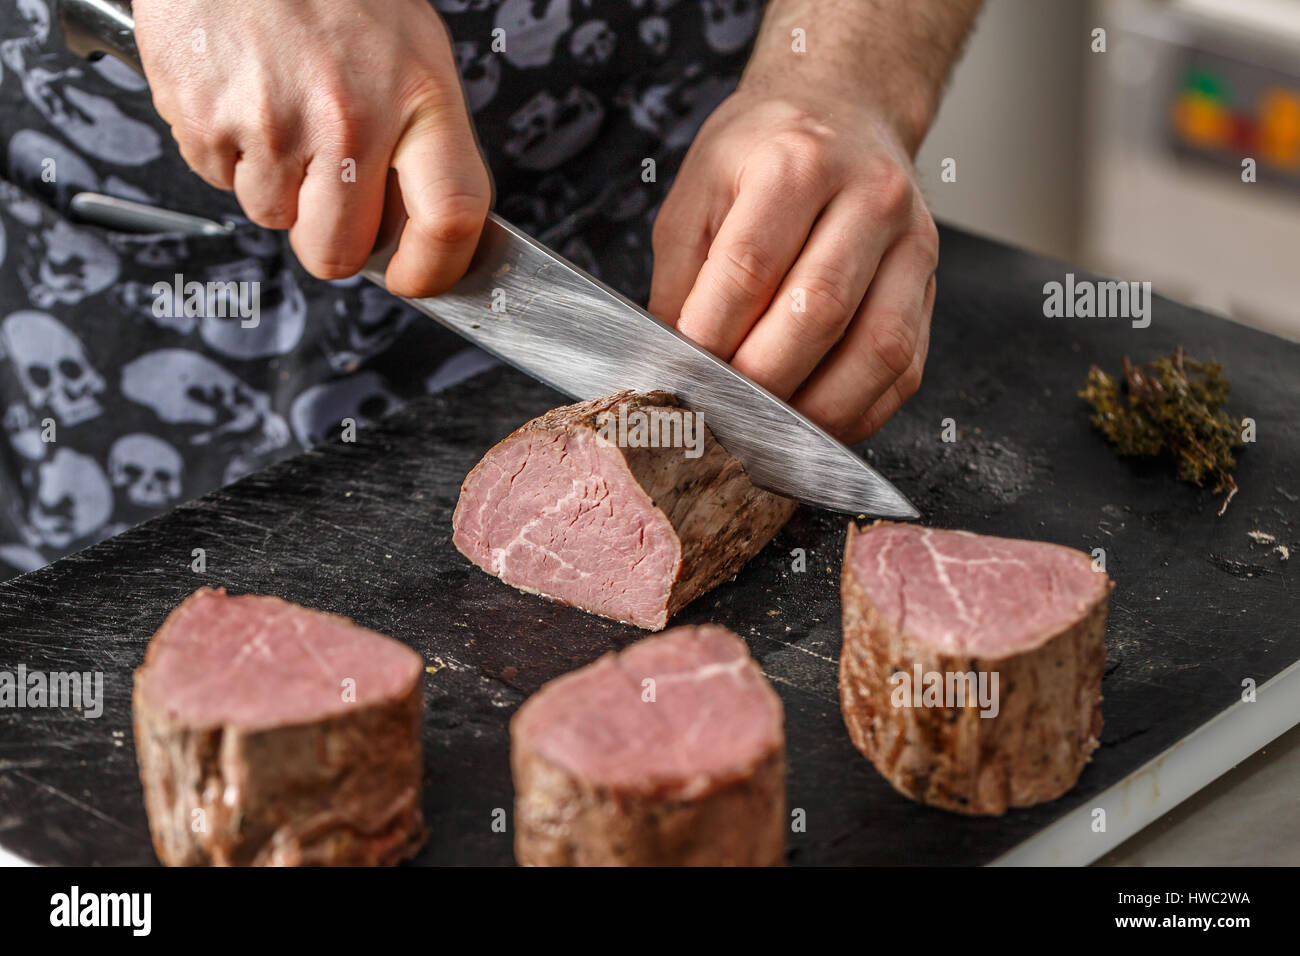 Chef is cutting boiled beef meat on black chopping board Stock Photo